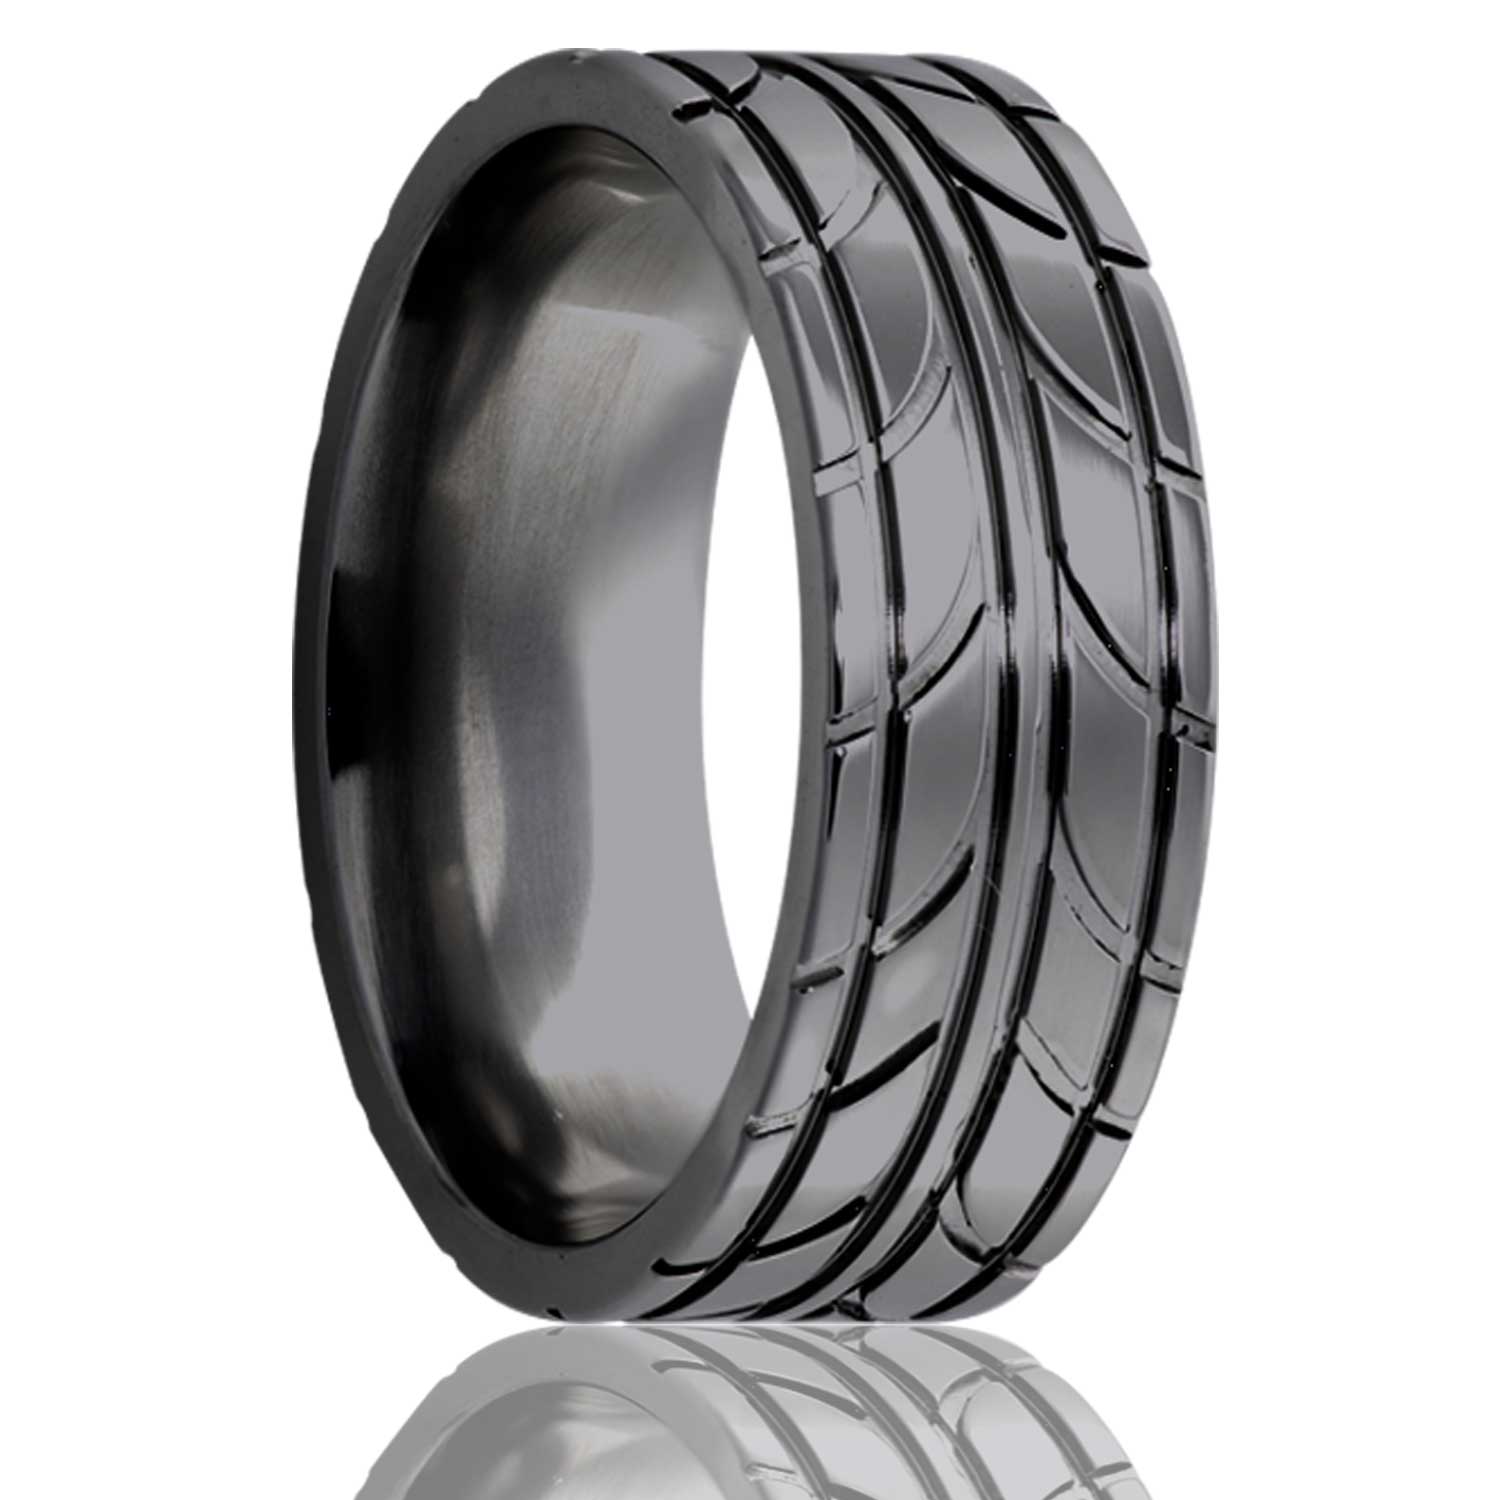 A tire treads zirconium men's wedding band displayed on a neutral white background.